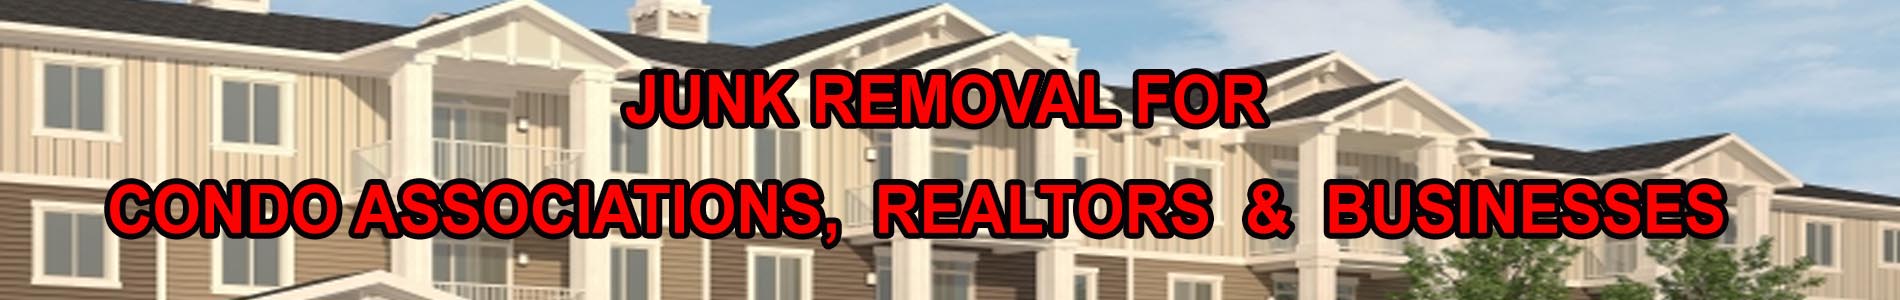 junk-removal-for-condo-associations-and-businesses1